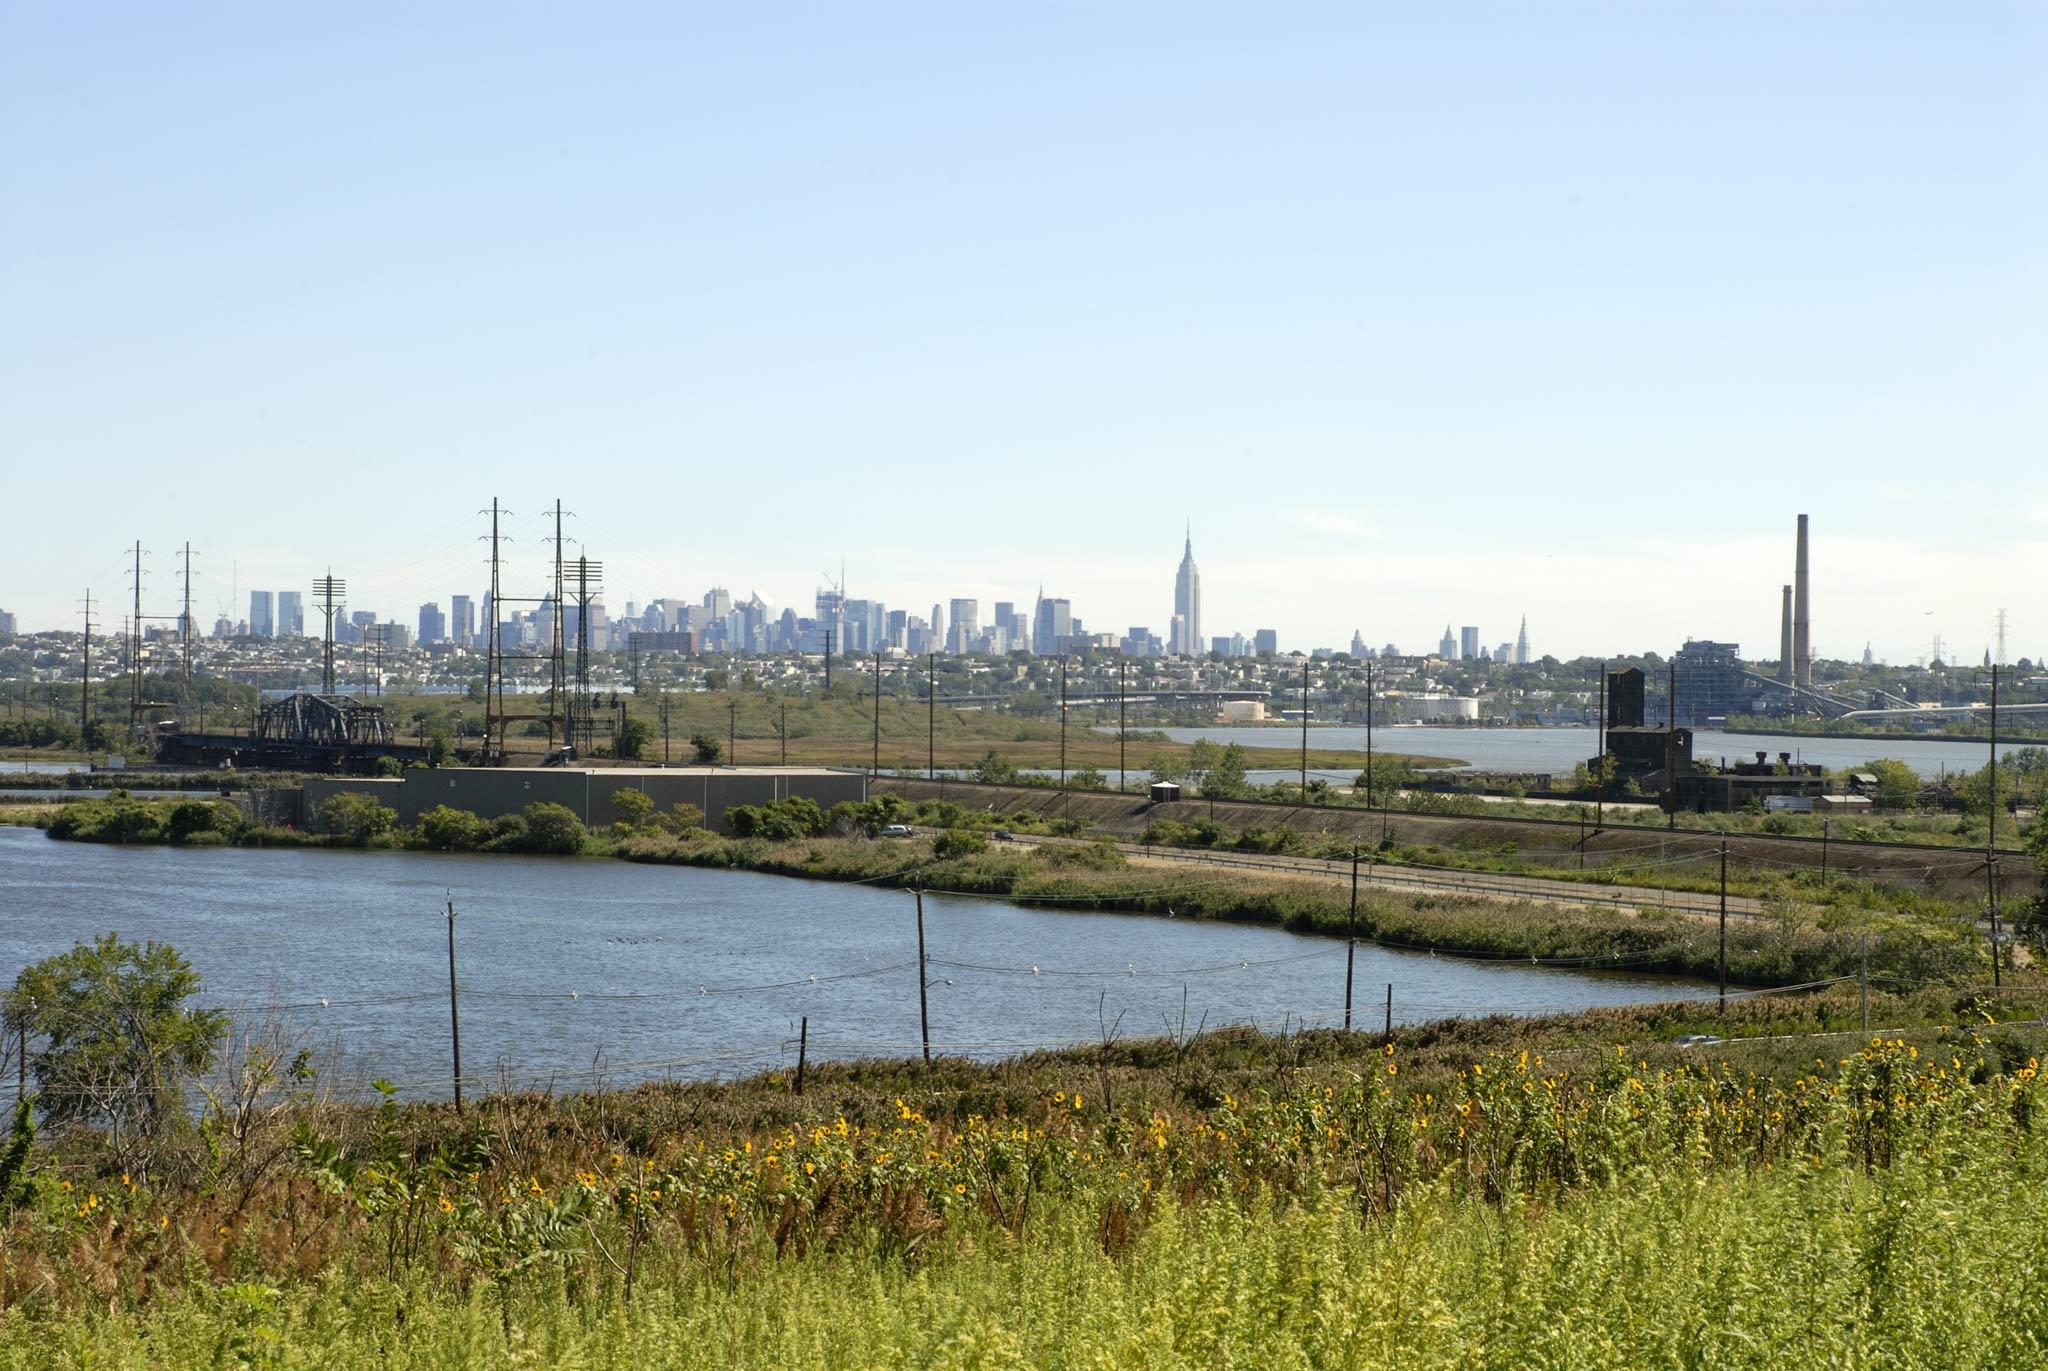 View of the Manhattan skyline in the distance with roads and electricity infrastructure visible in the foreground